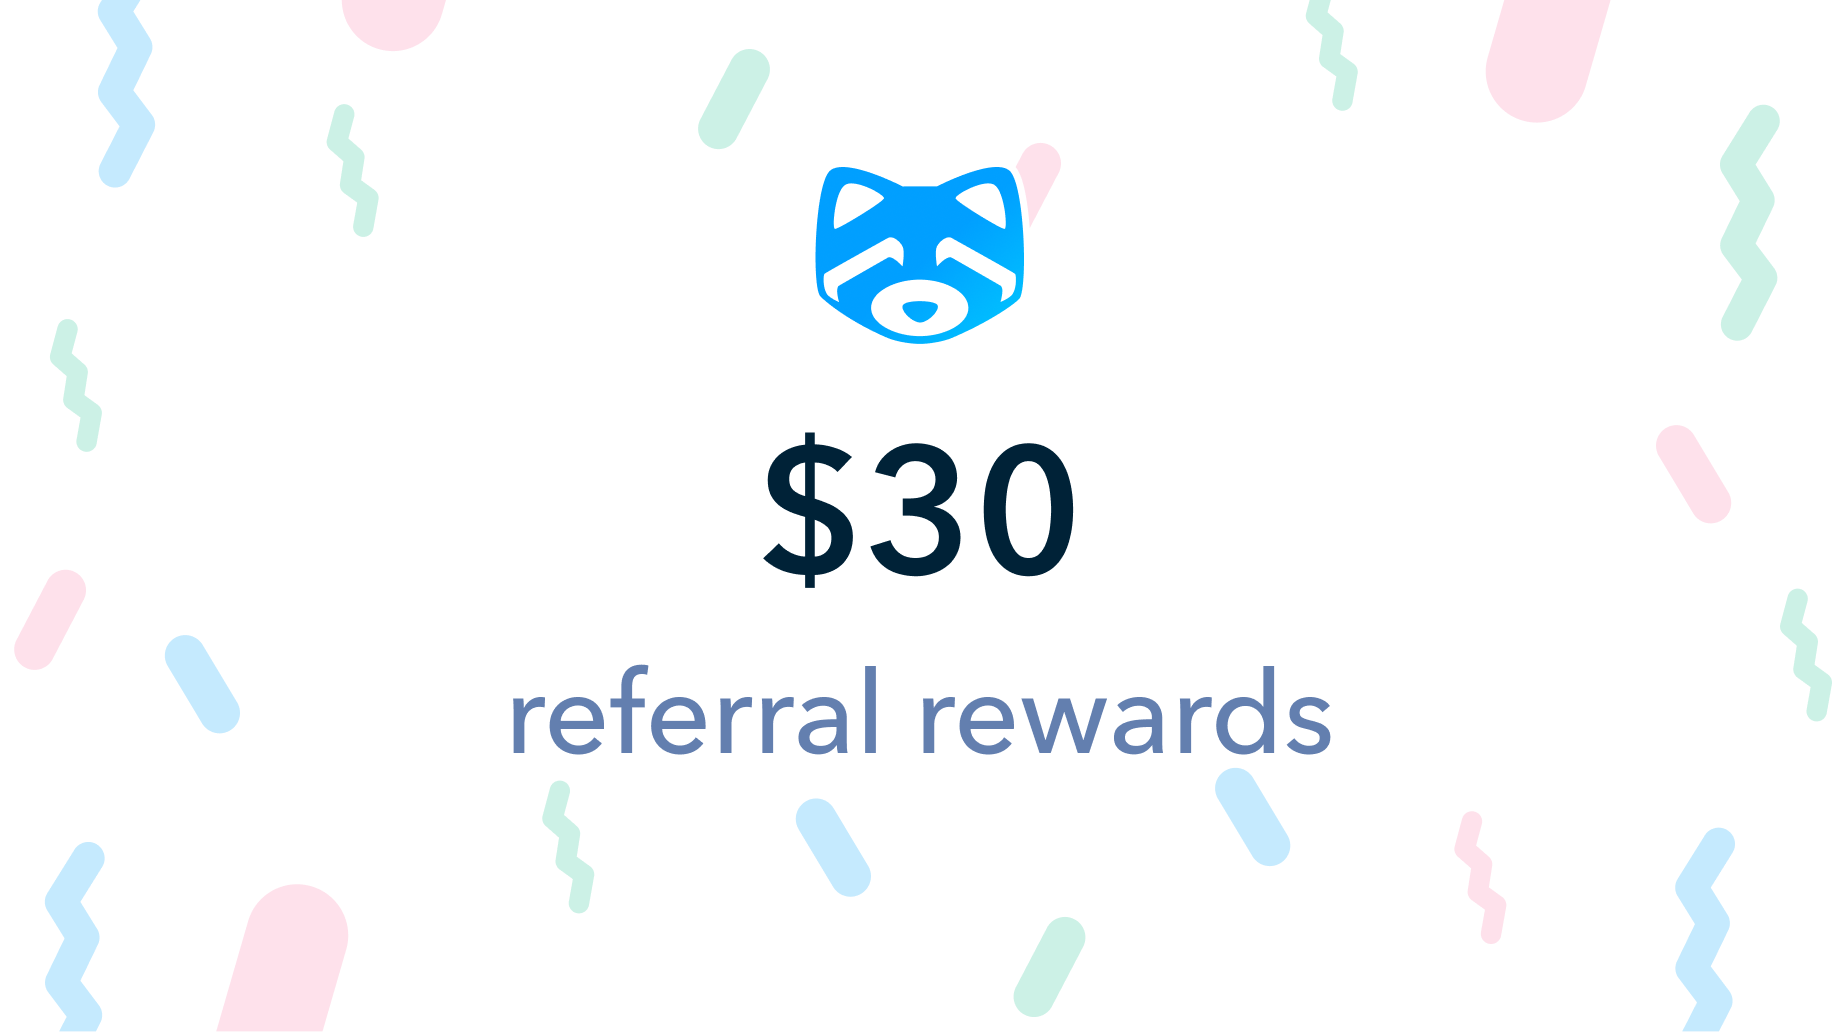 We're increasing referral rewards to $30 each for the holidays